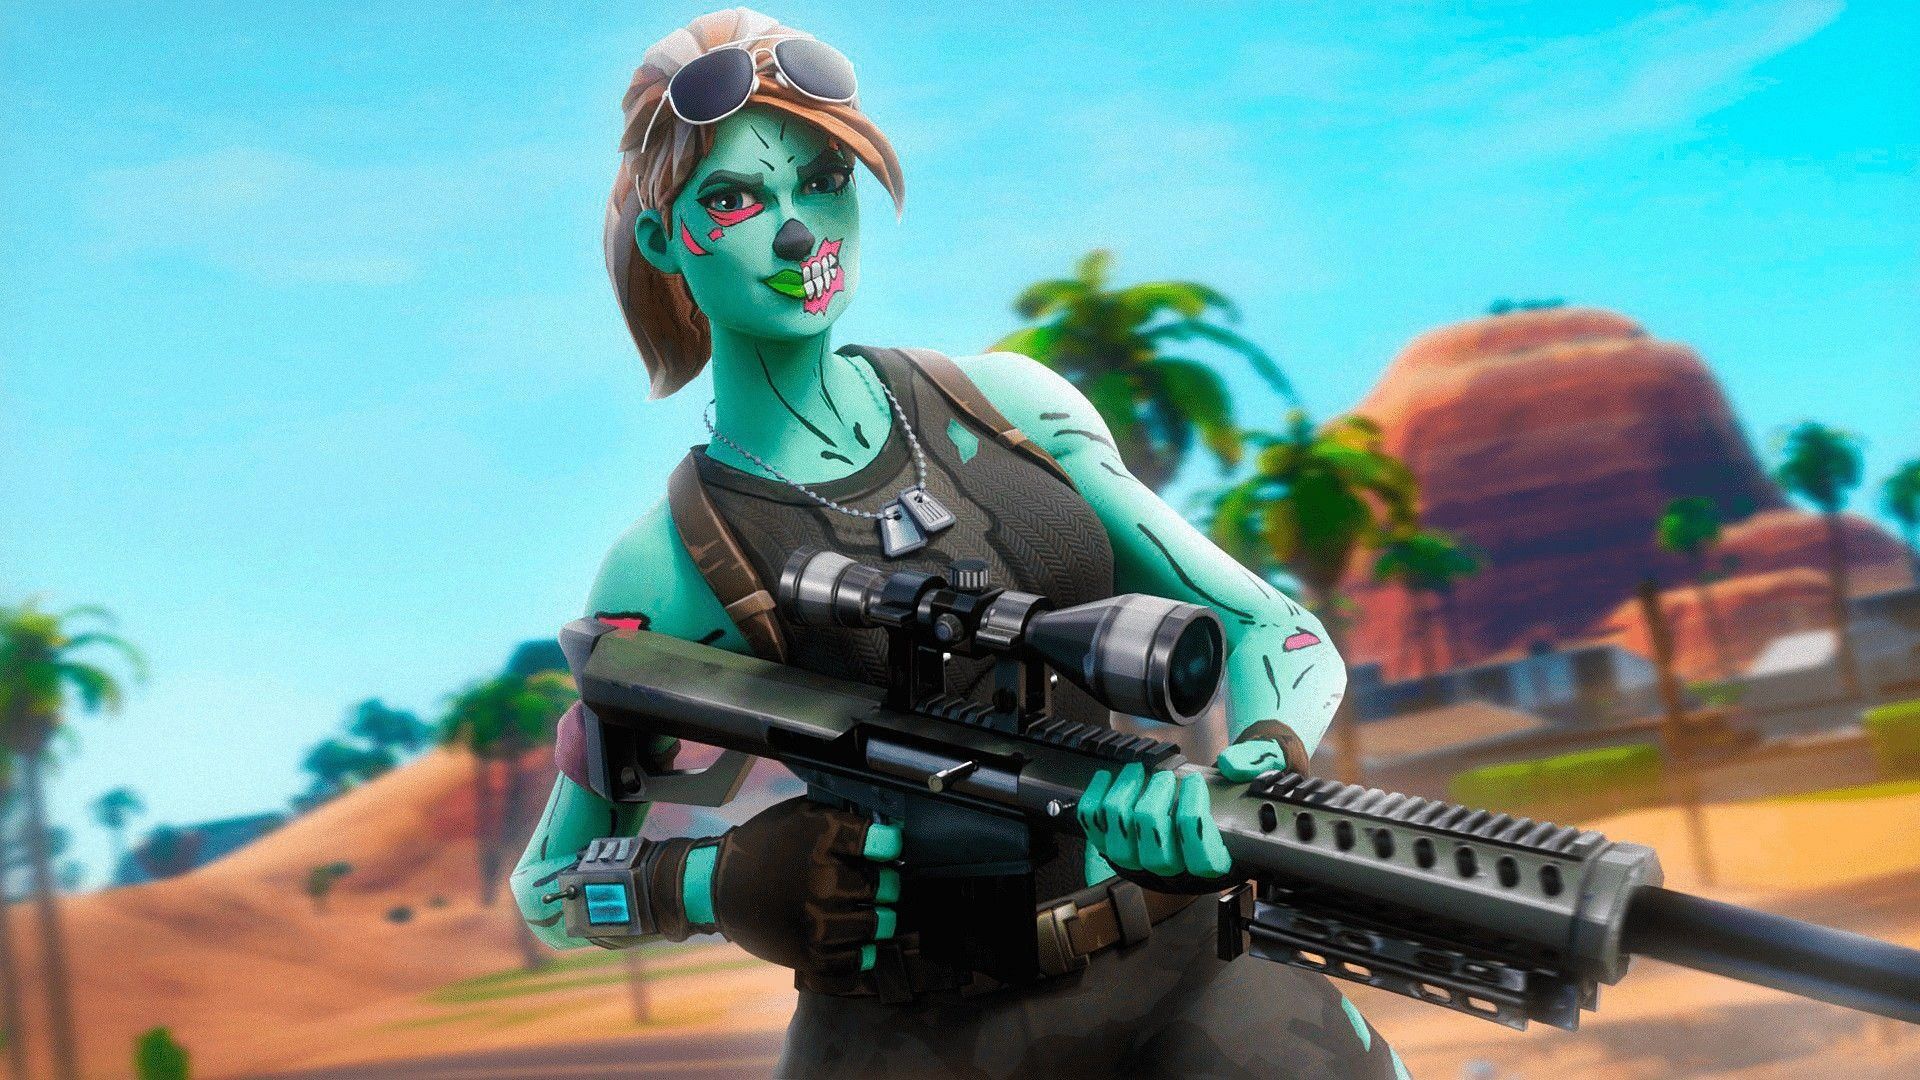 Ghoul Trooper is one of the most popular and the sweatiest Fortnite skins ever (Image via Epic Games)